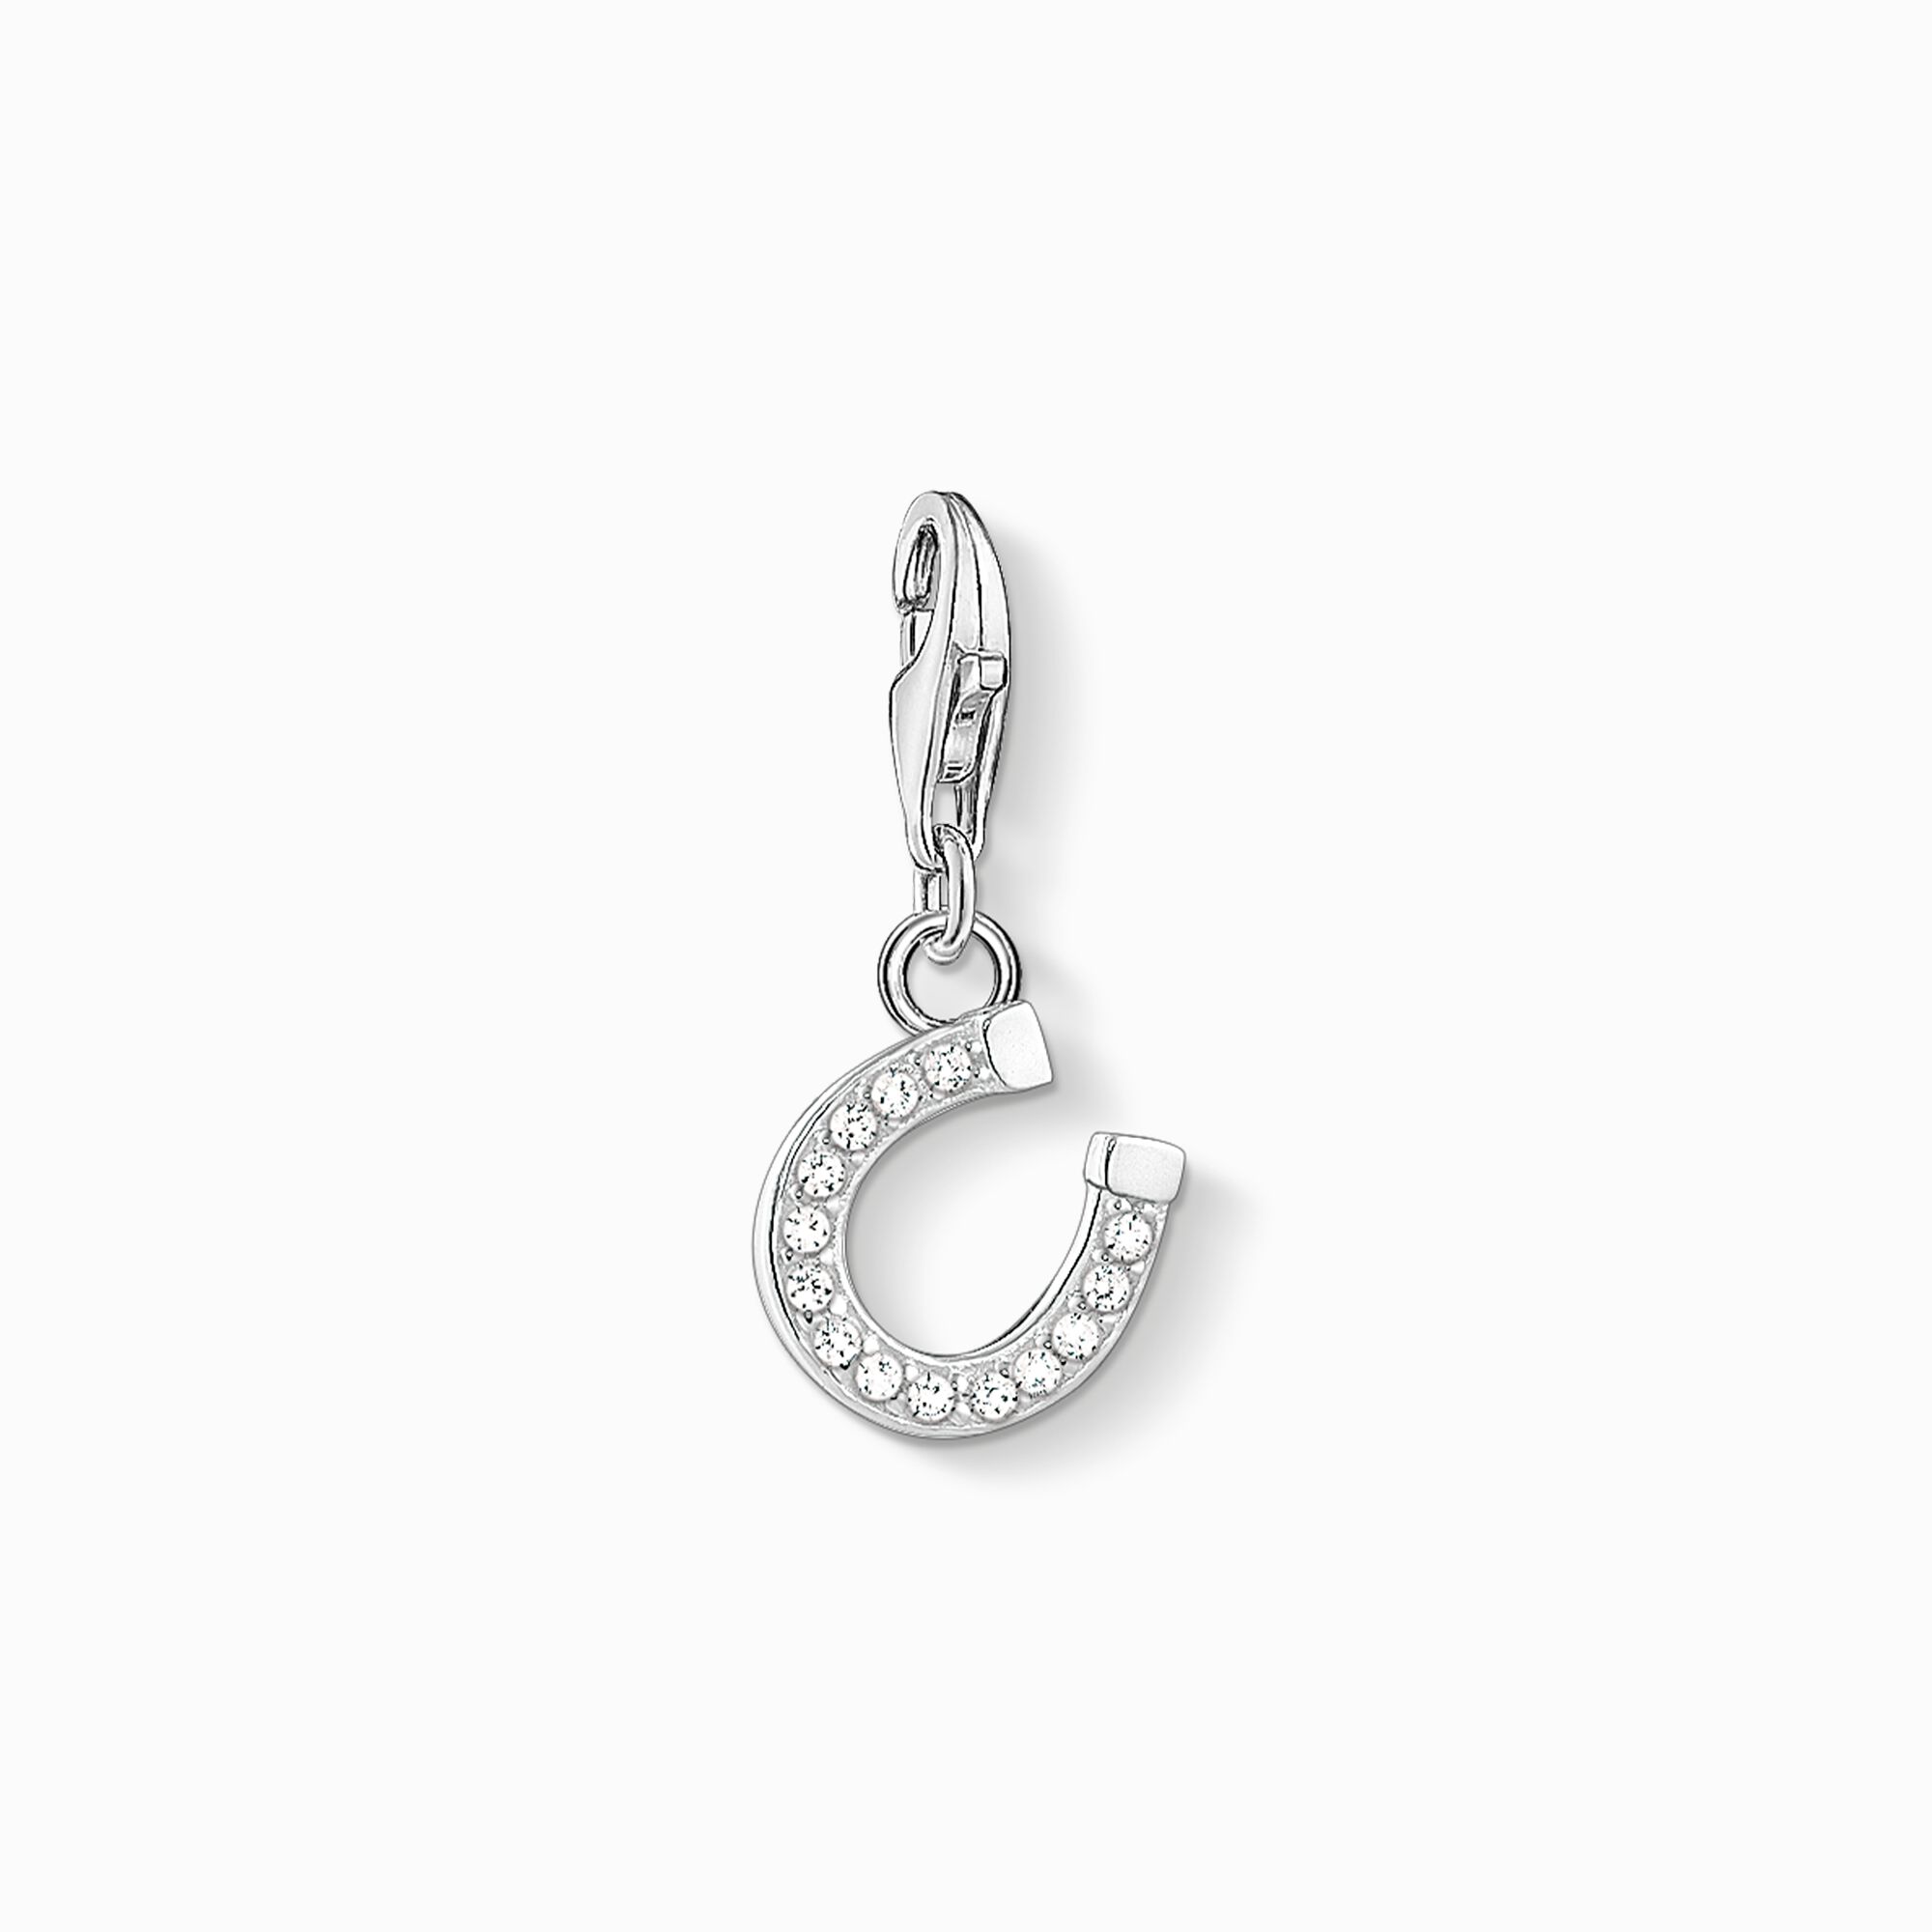 Charm pendant horseshoe from the Charm Club collection in the THOMAS SABO online store